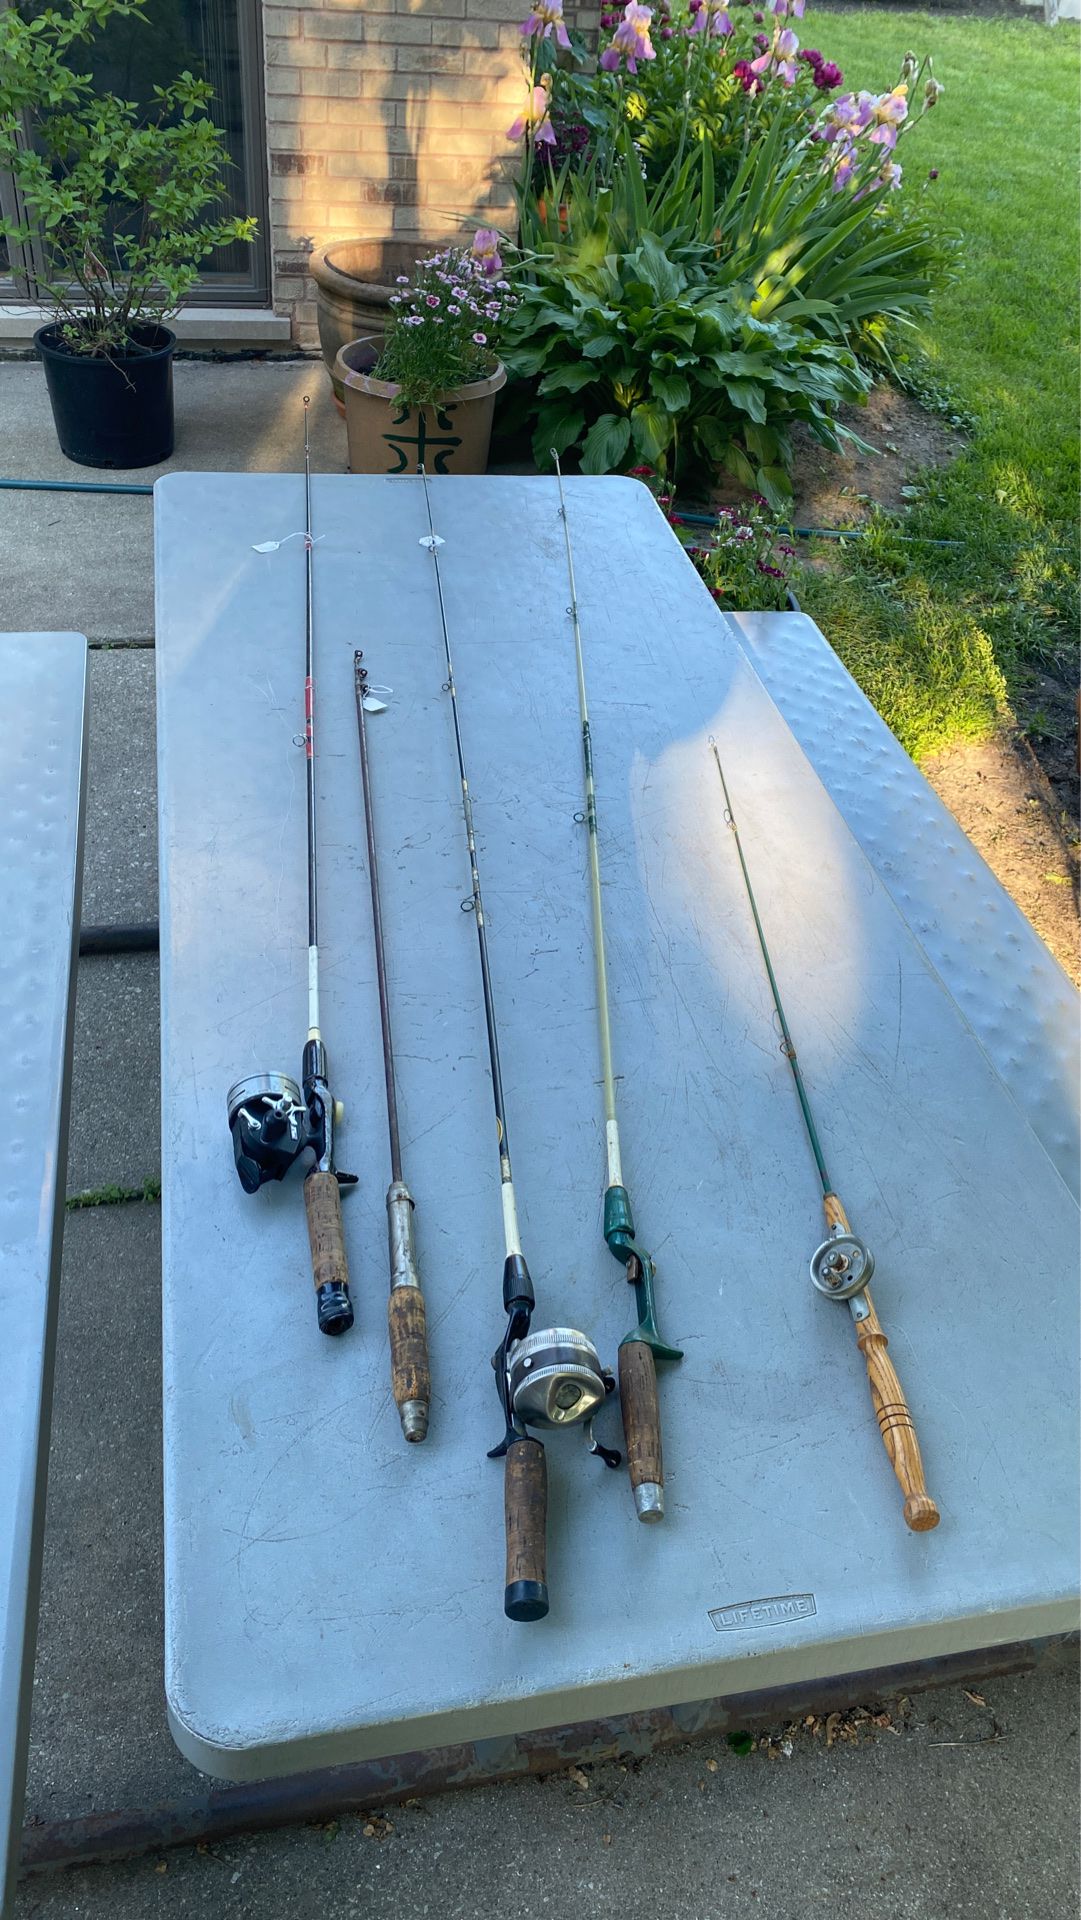 Rods and reels fishing pools picture says it all